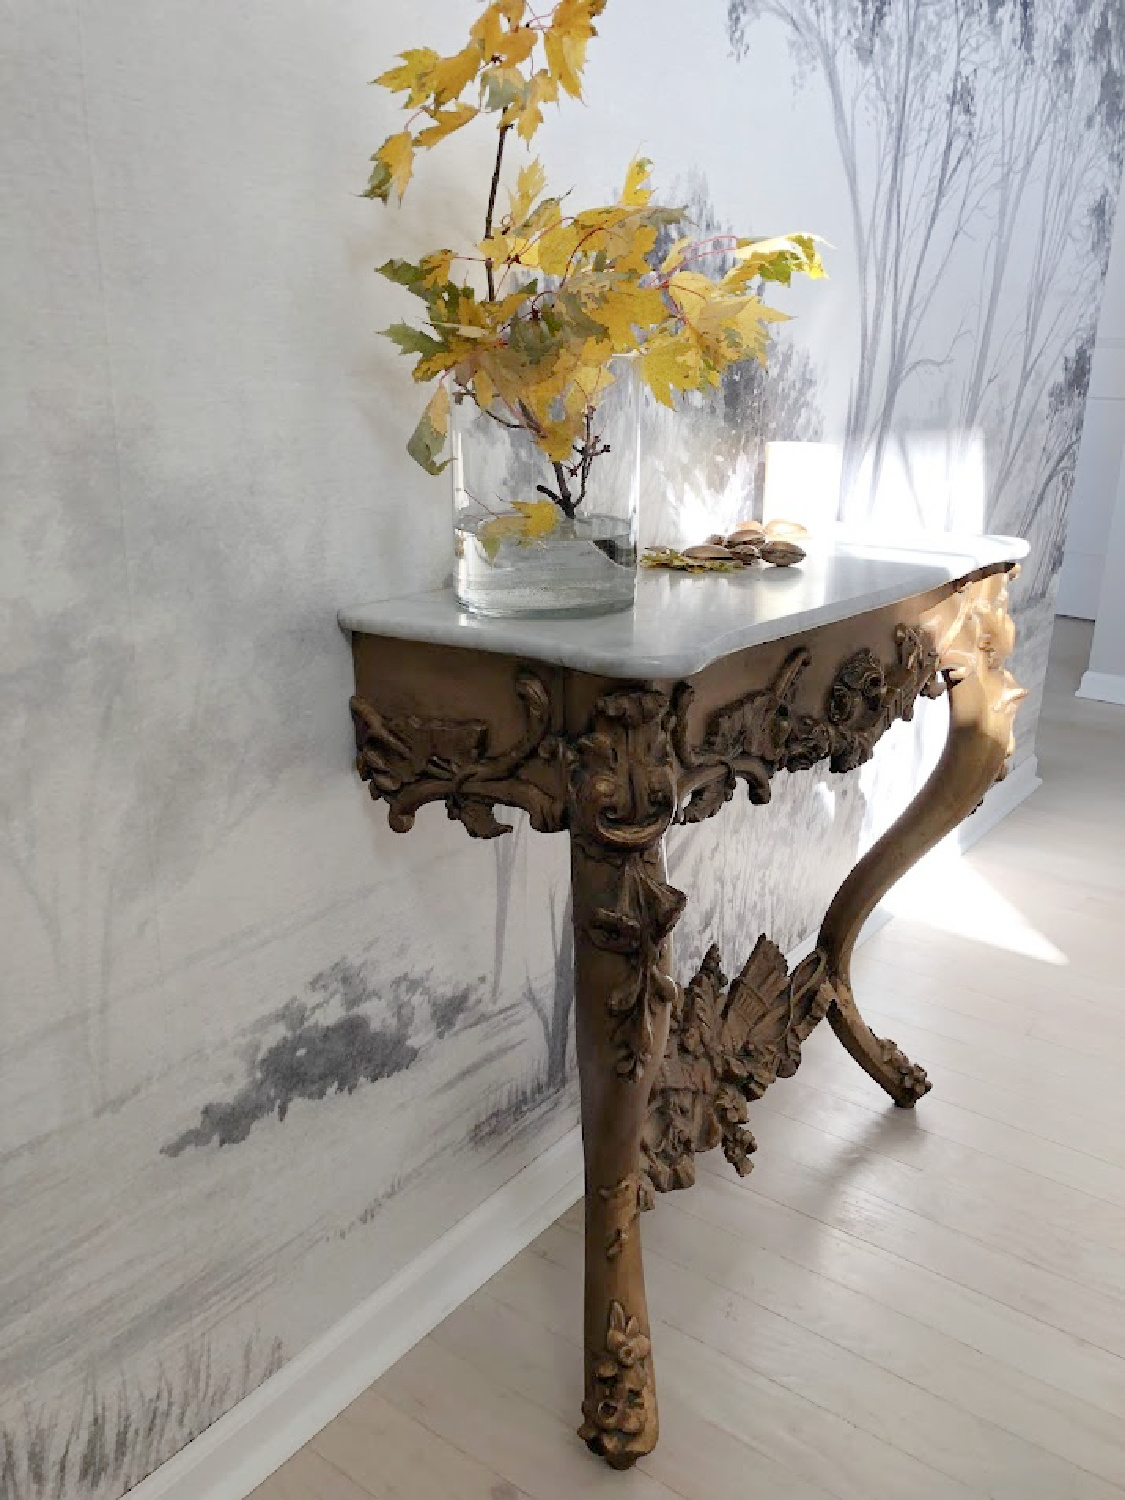 French antique console table in our entry with vase of yellow maple leaf branches - Hello Lovely Studio.